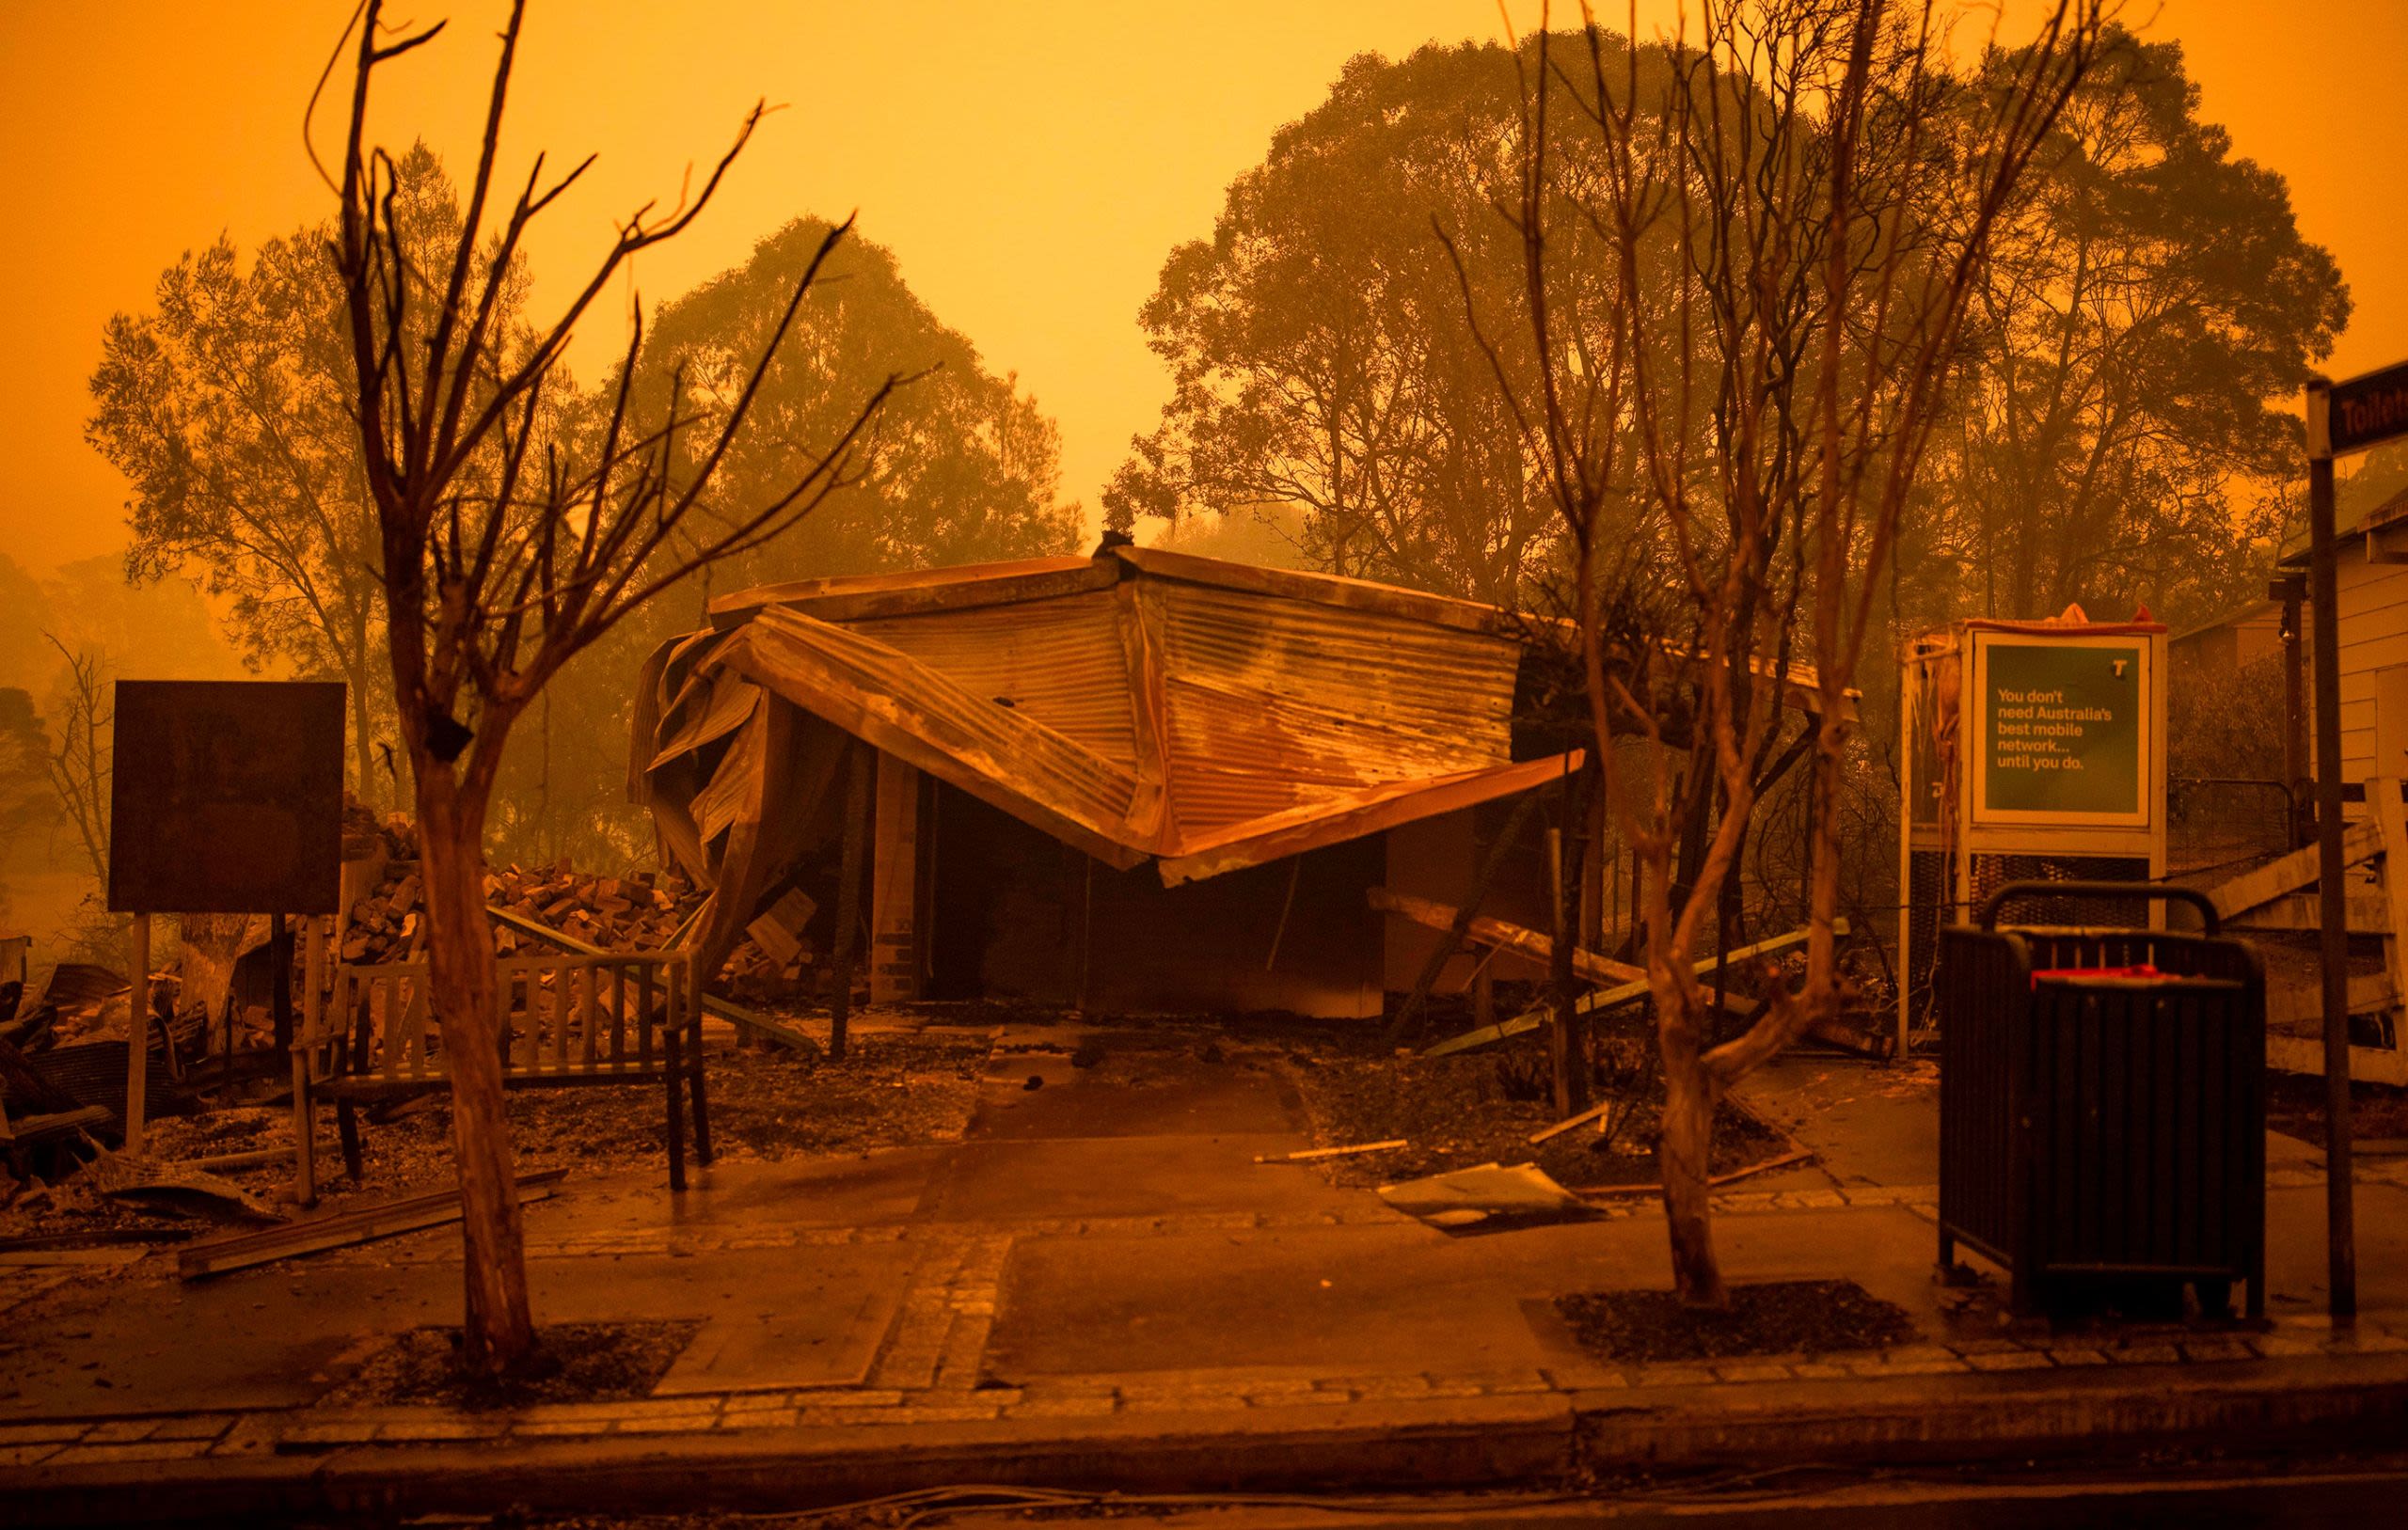 The remains of burnt out buildings in the New South Wales town of Cobargo in December 2019. Image: Sean Davey/Getty Images